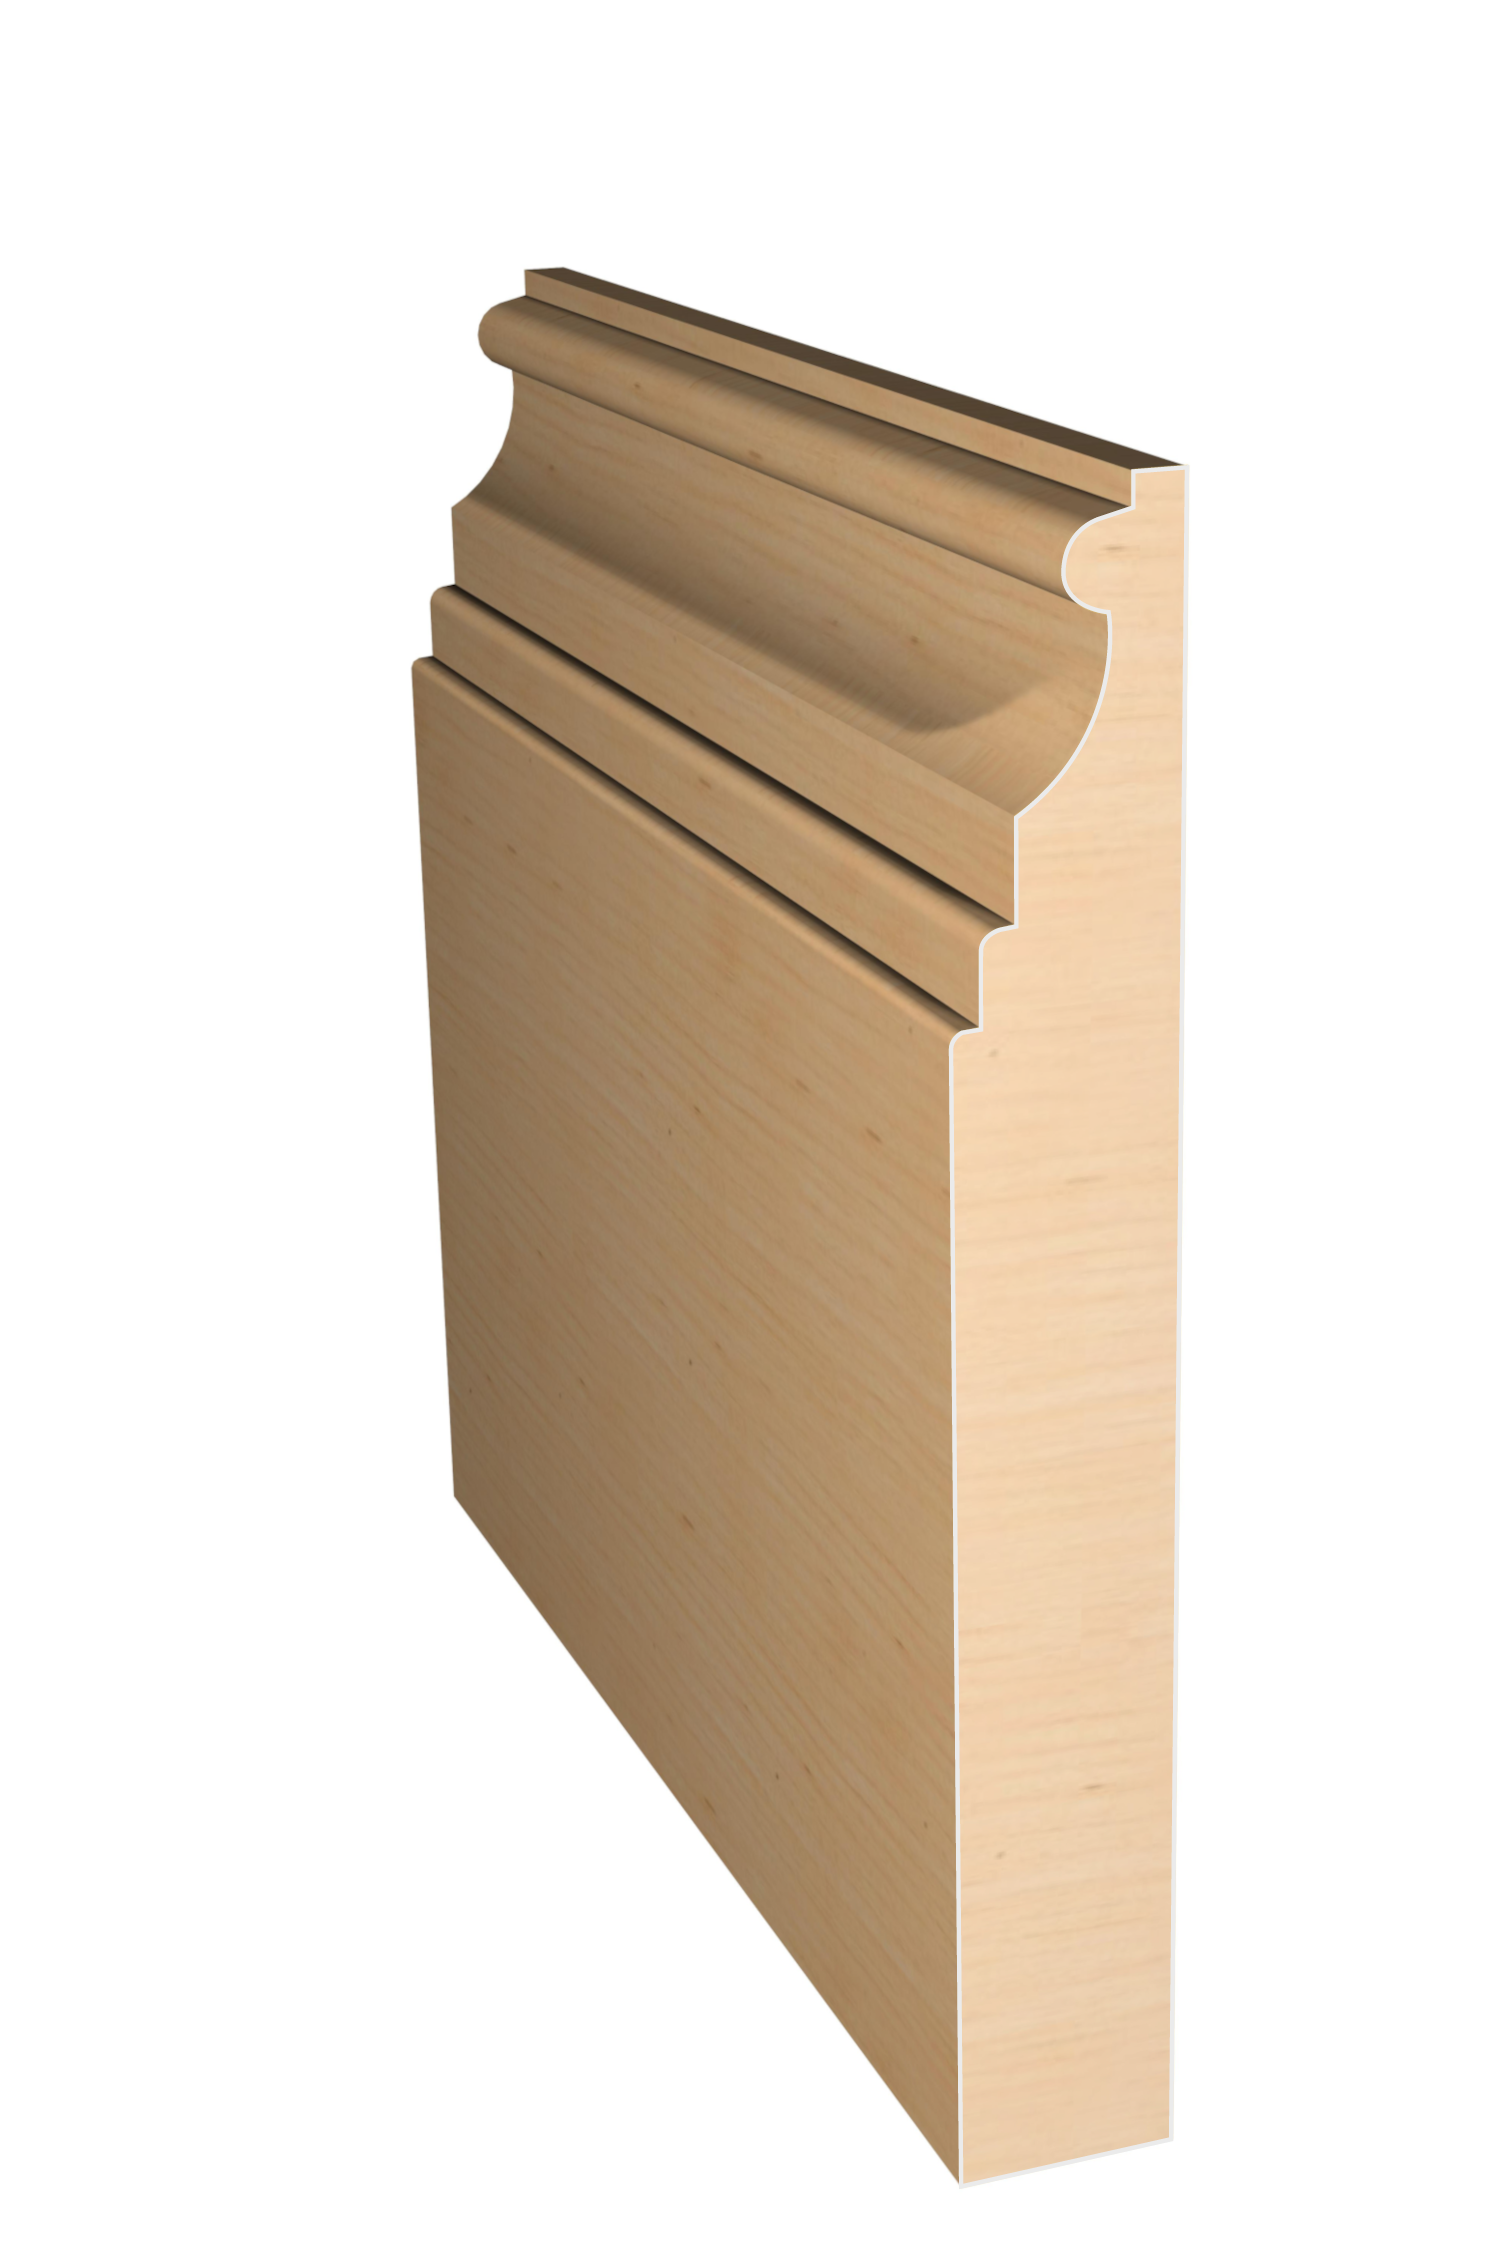 Three dimensional rendering of custom base wood molding BAPL51220 made by Public Lumber Company in Detroit.